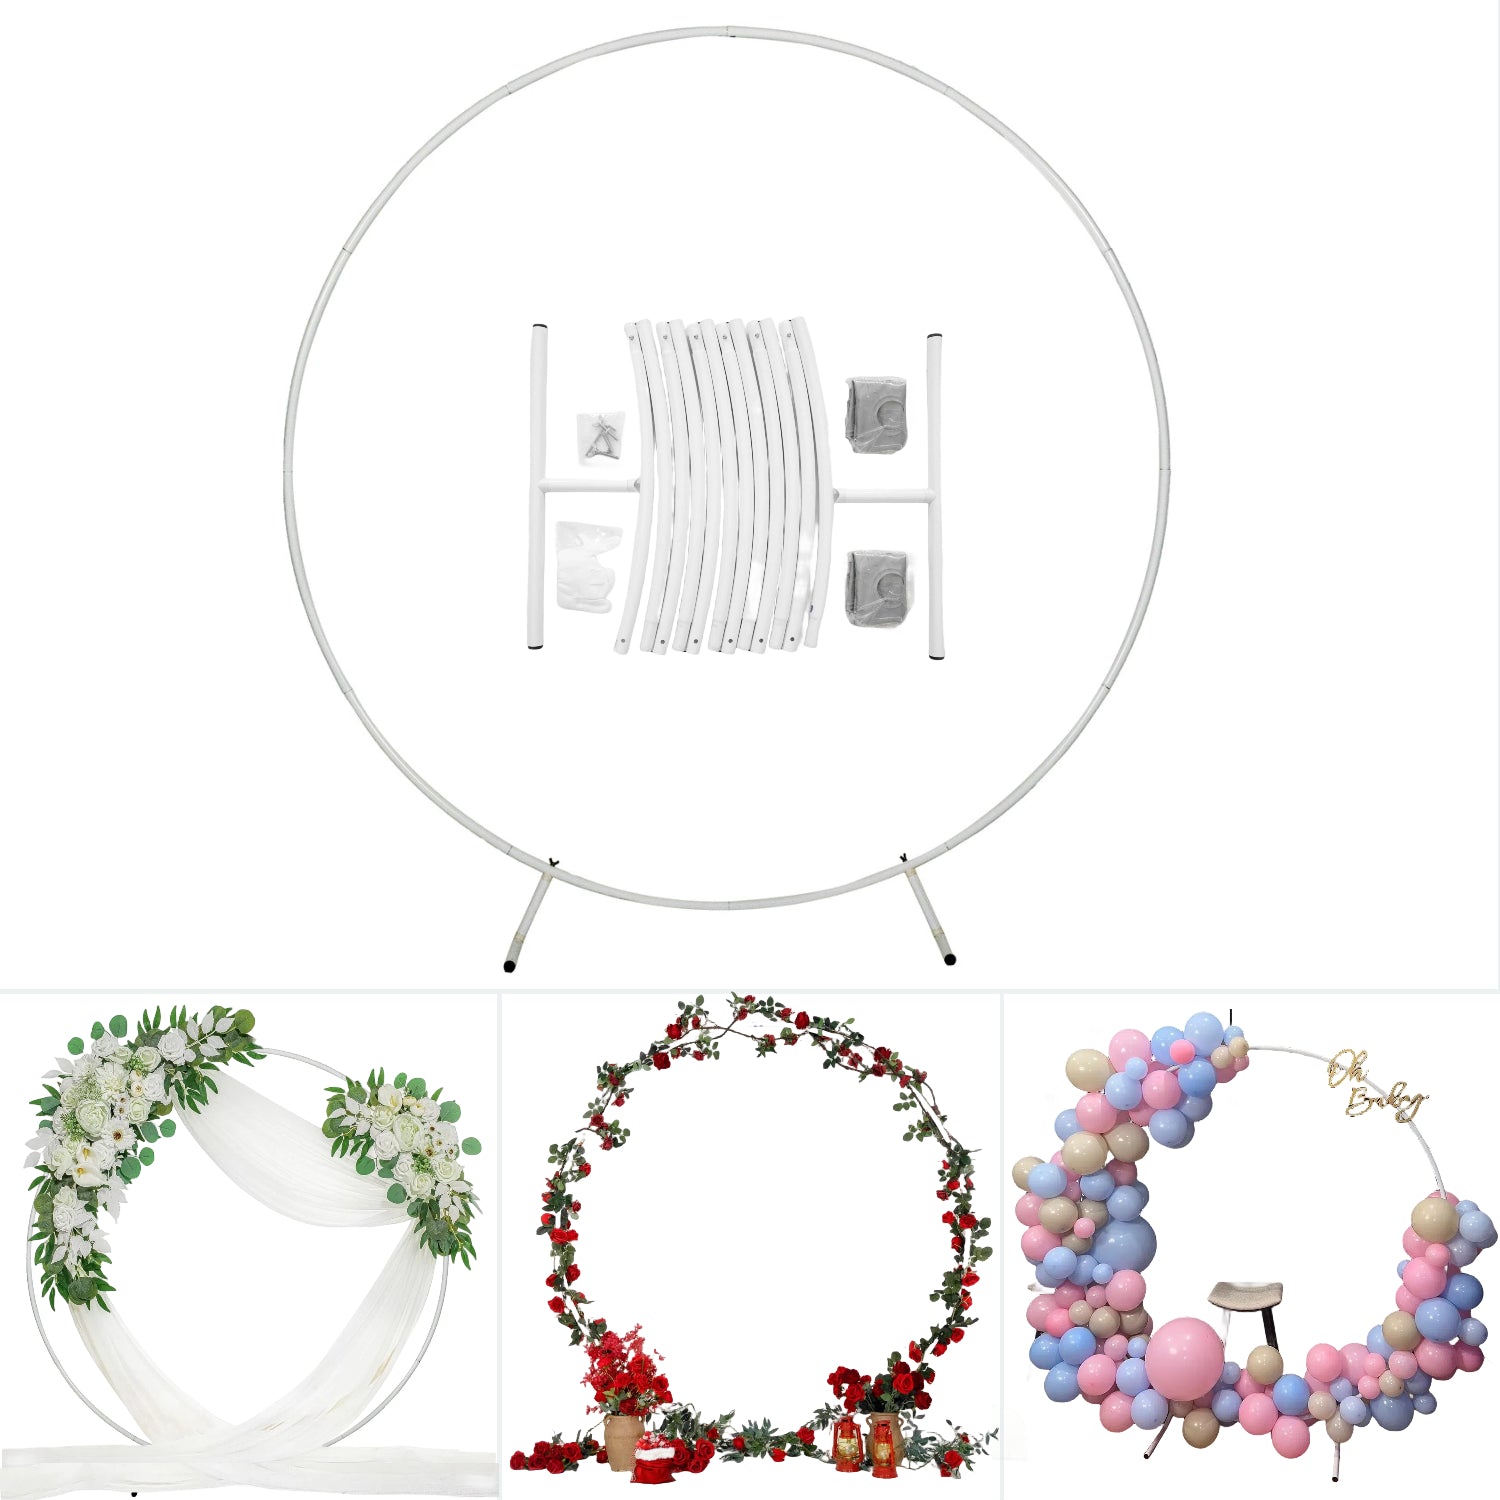 Round Stand White 6.5x6.5ft(2x2m) Aluminum Frames for Balloon Party Decor Wedding Ring Flower Arch